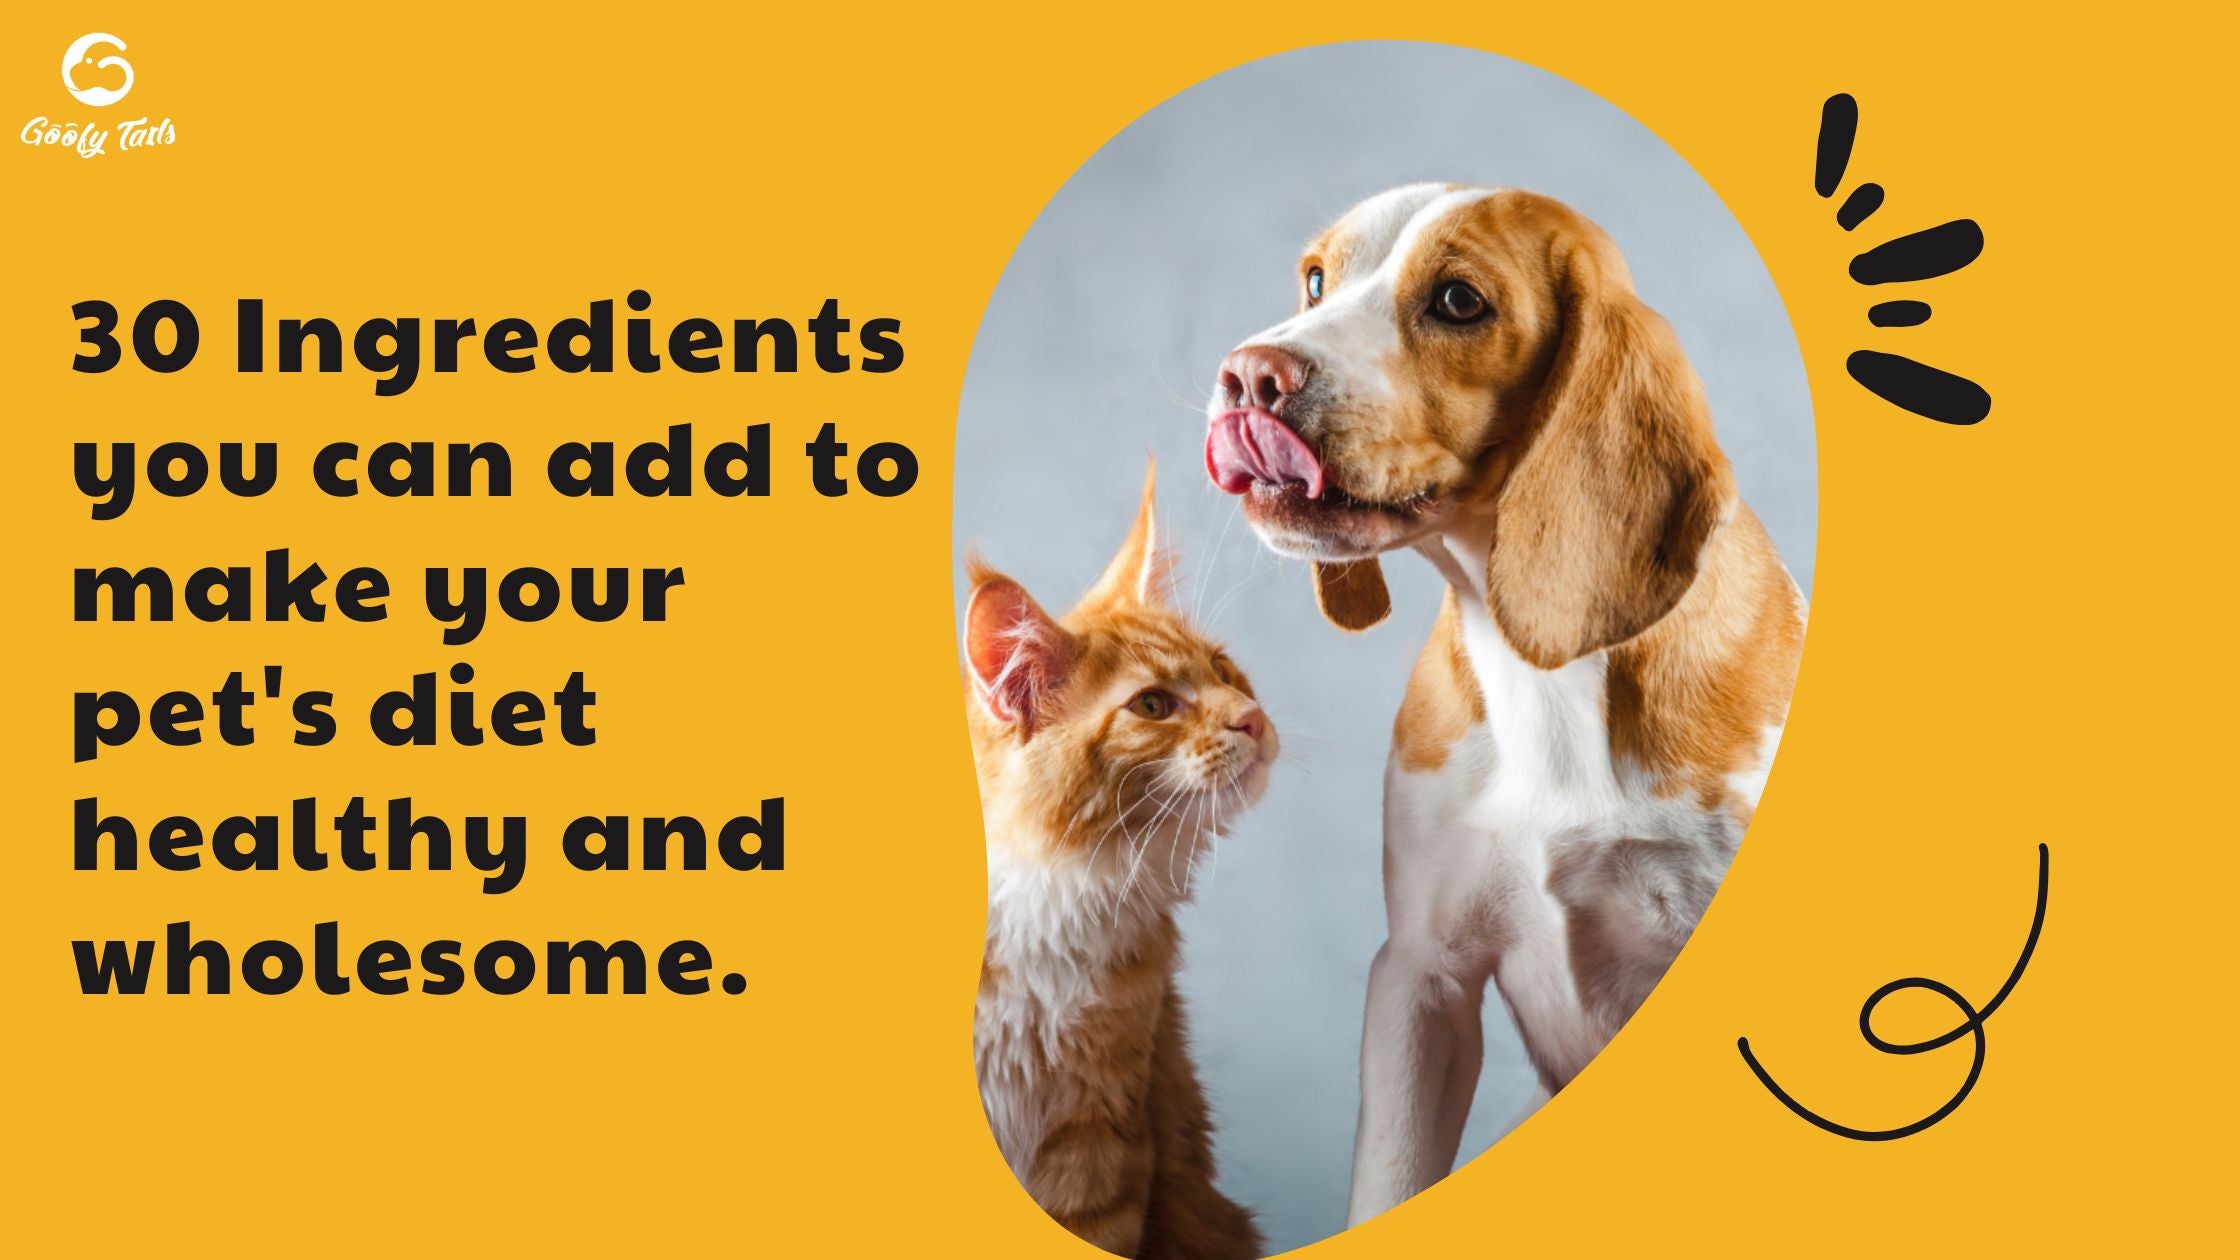 30 Ingredients you can add to make your pet's diet healthy and wholesome